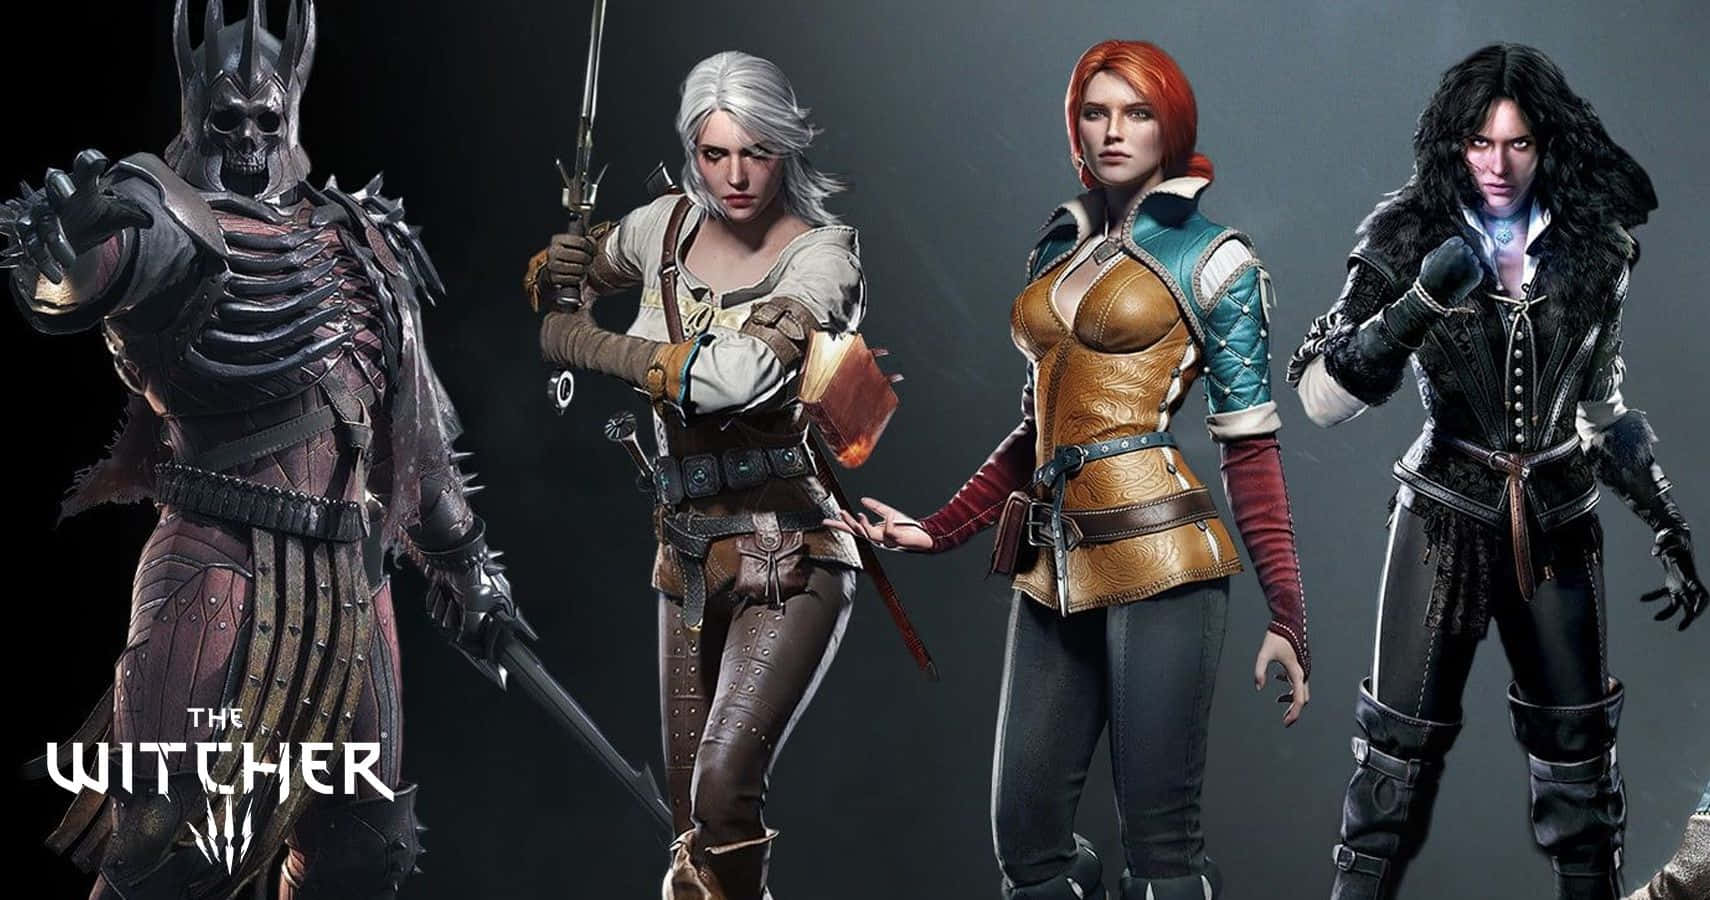 The Witcher Characters in Action Wallpaper